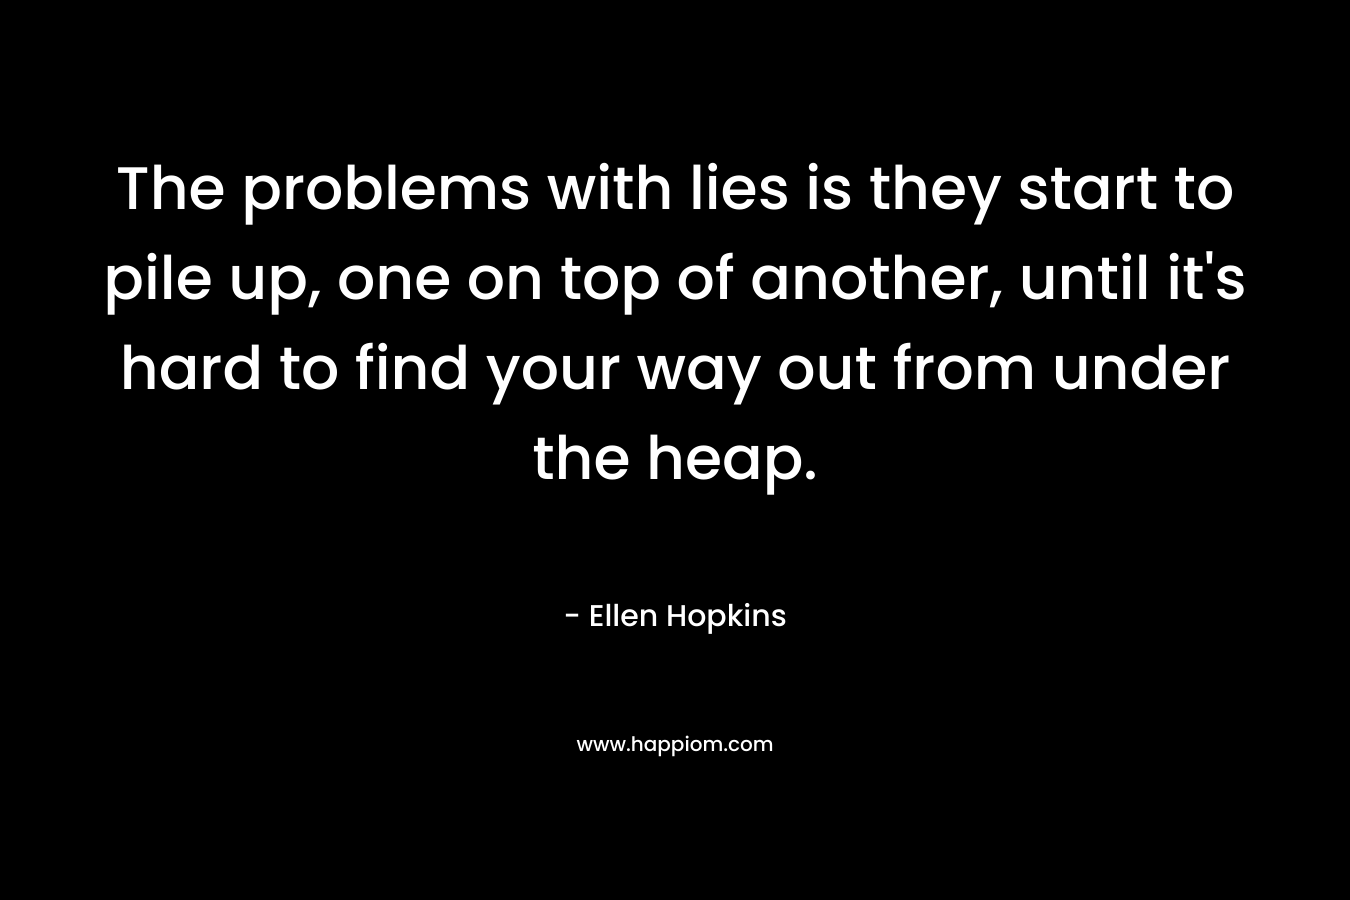 The problems with lies is they start to pile up, one on top of another, until it’s hard to find your way out from under the heap. – Ellen Hopkins